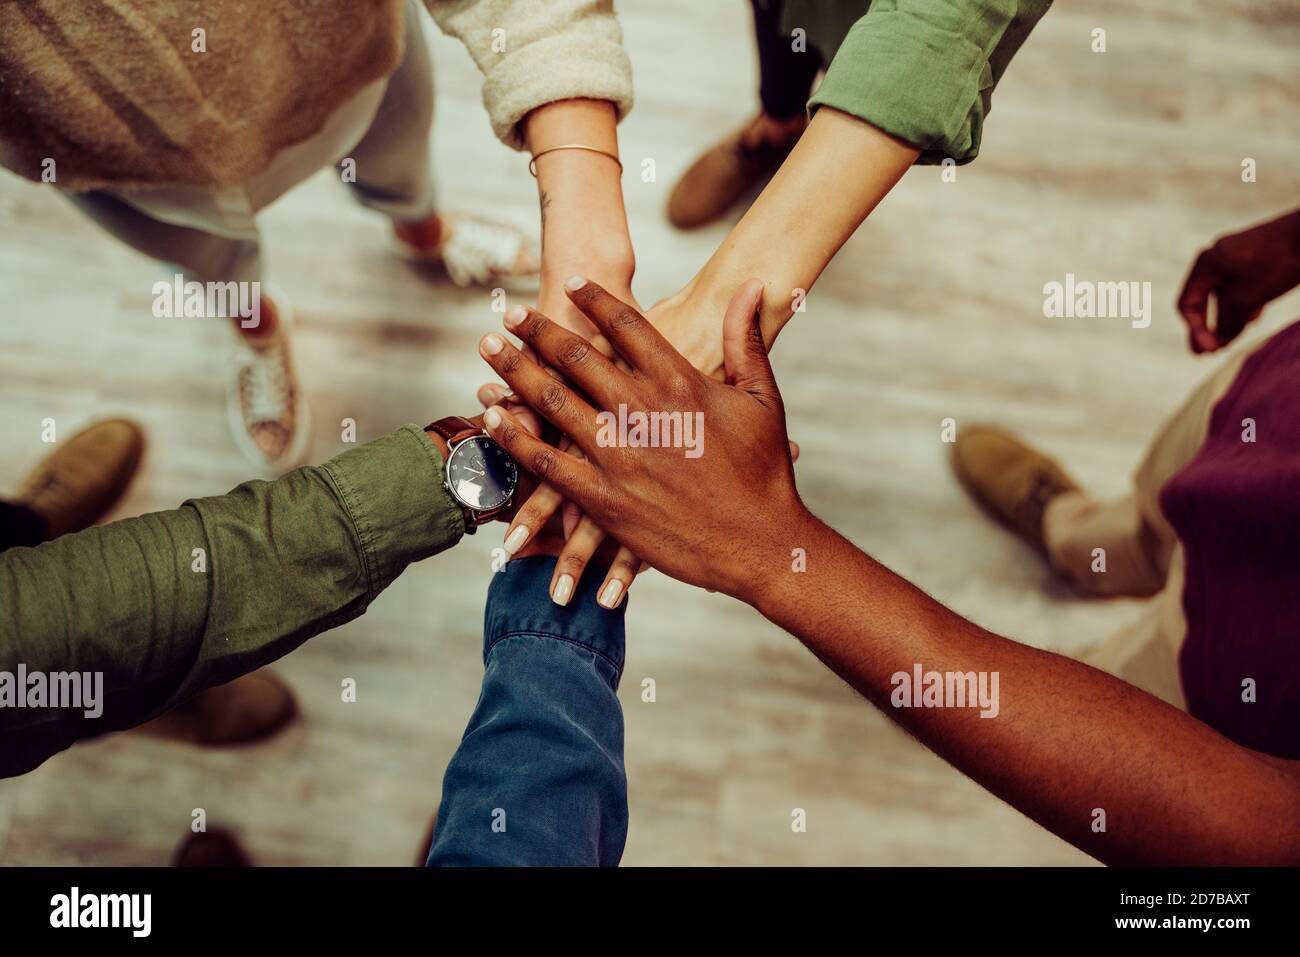 Successful business group hands stacked together showing unity and team work. Stock Photo